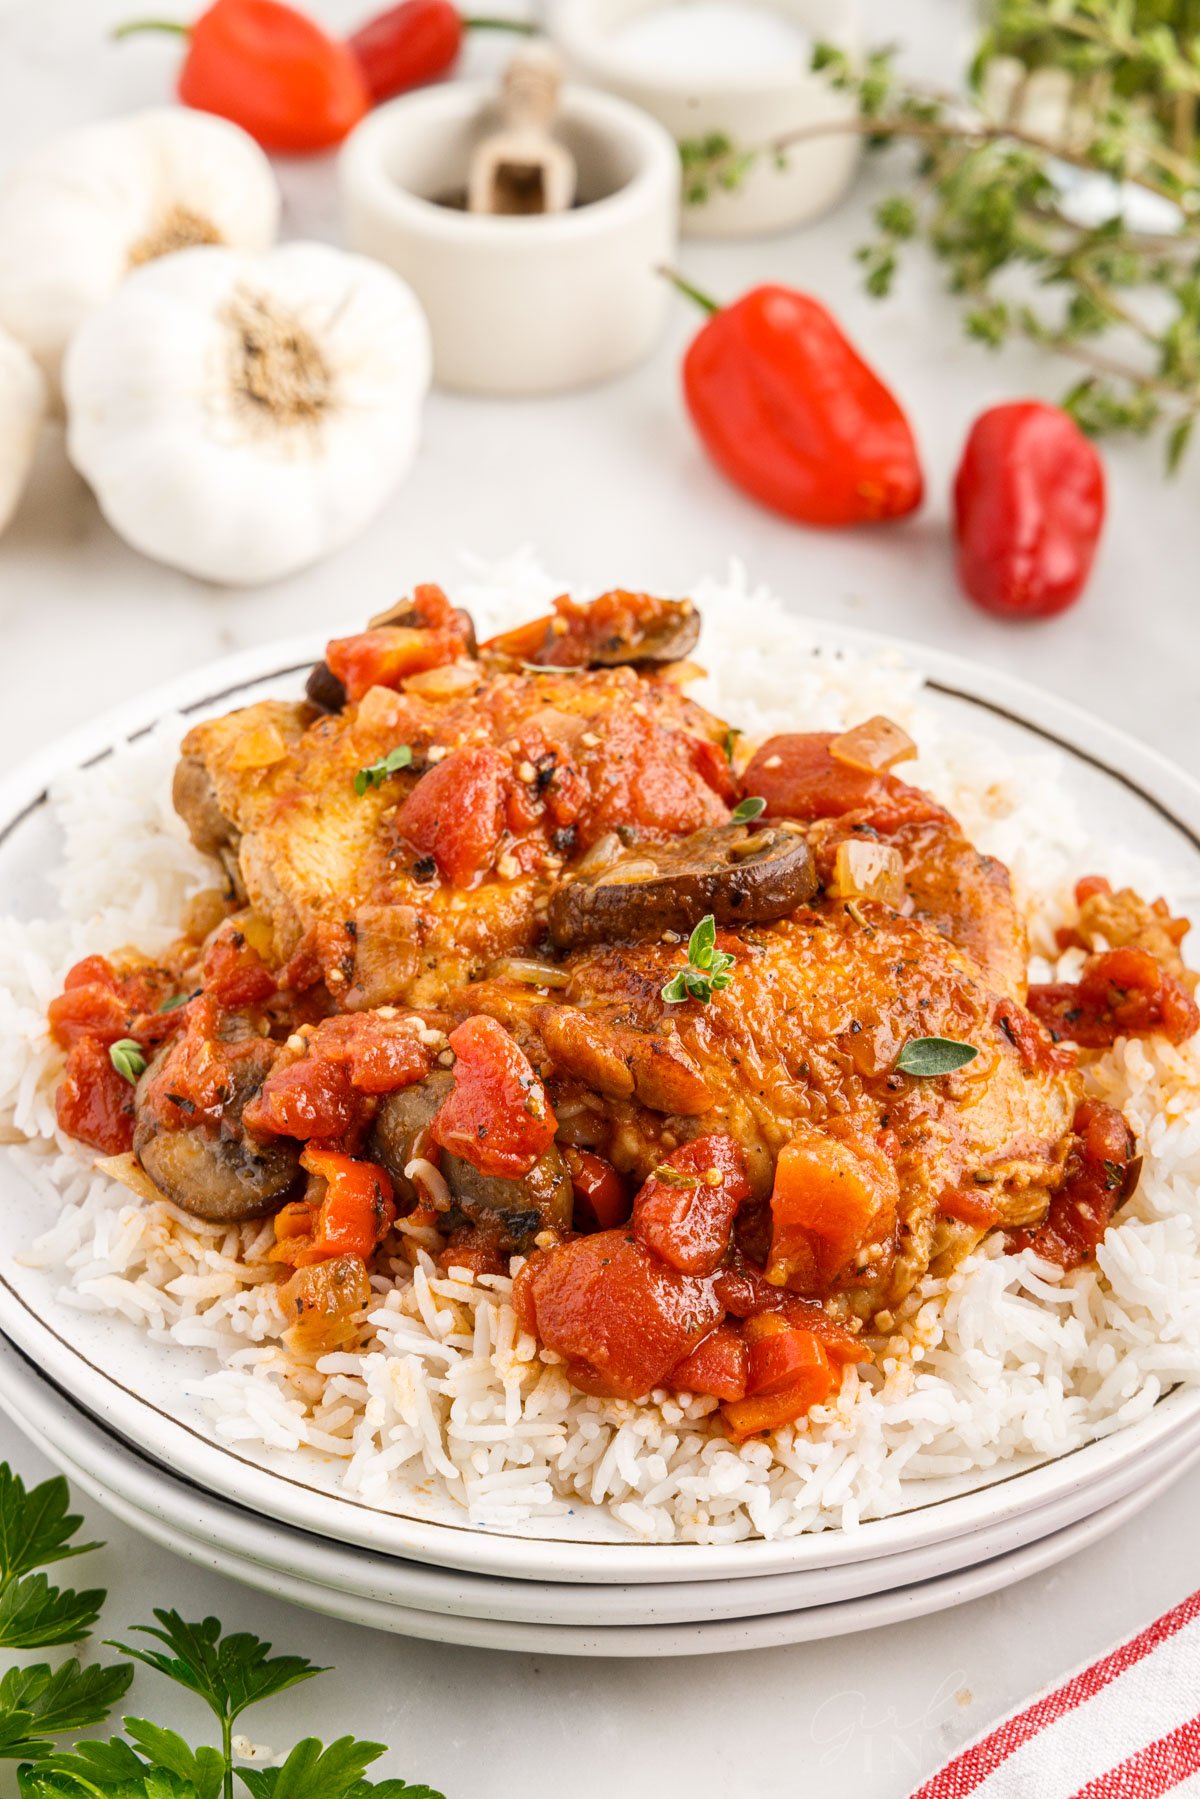 Plate piled with rice and chicken cacciatore recipe over the rice.